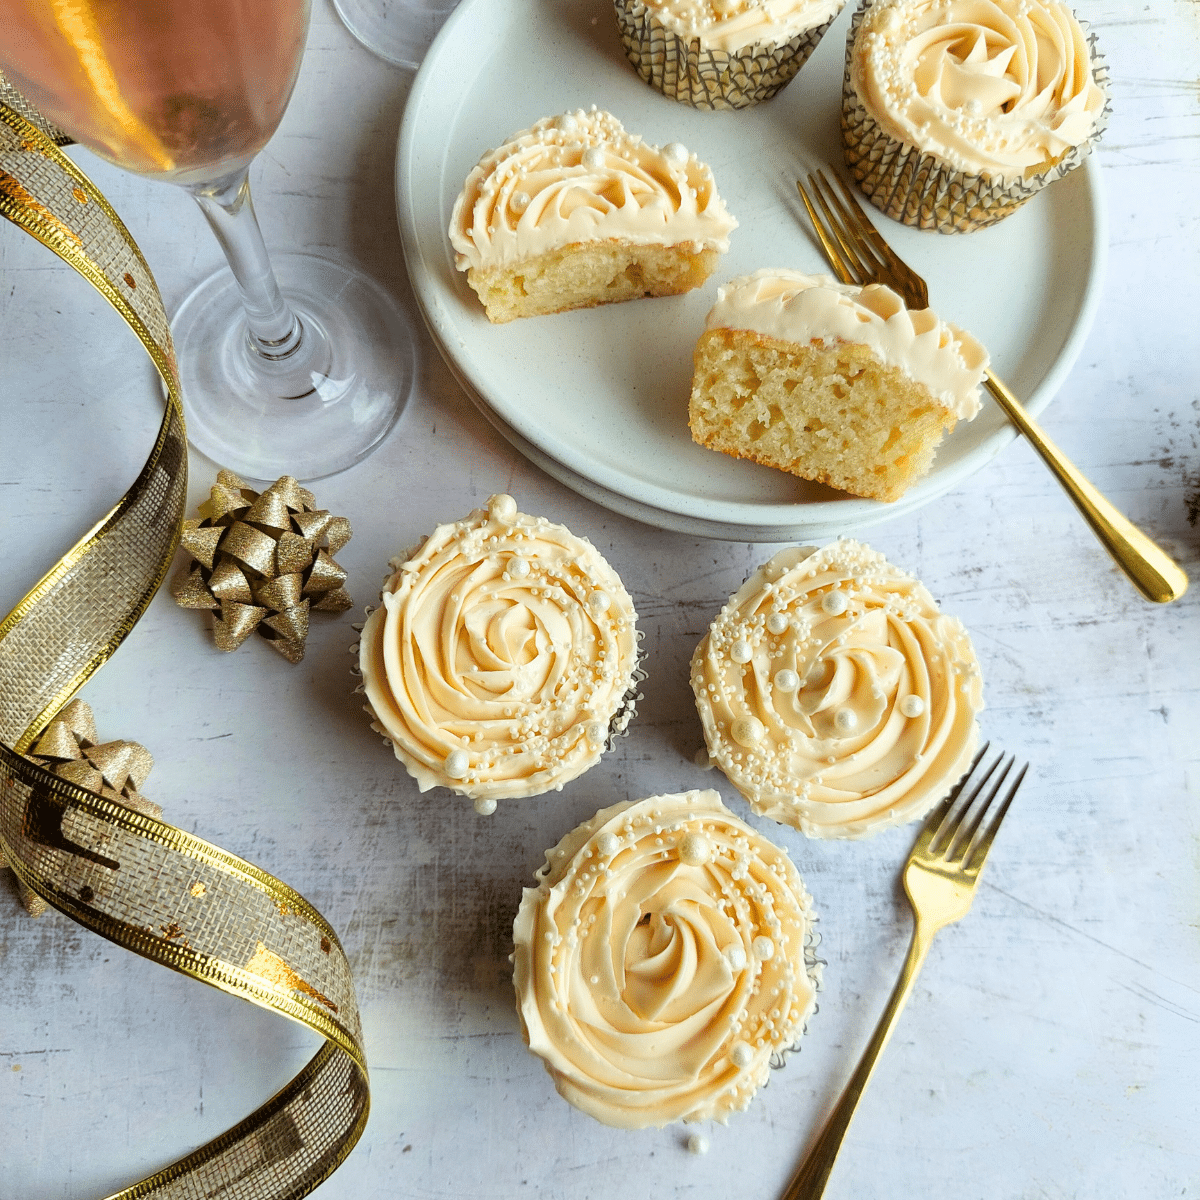 Enjoy special moments with my Celebration Cupcakes infused with the flavor of non-alcoholic sparkling wine.